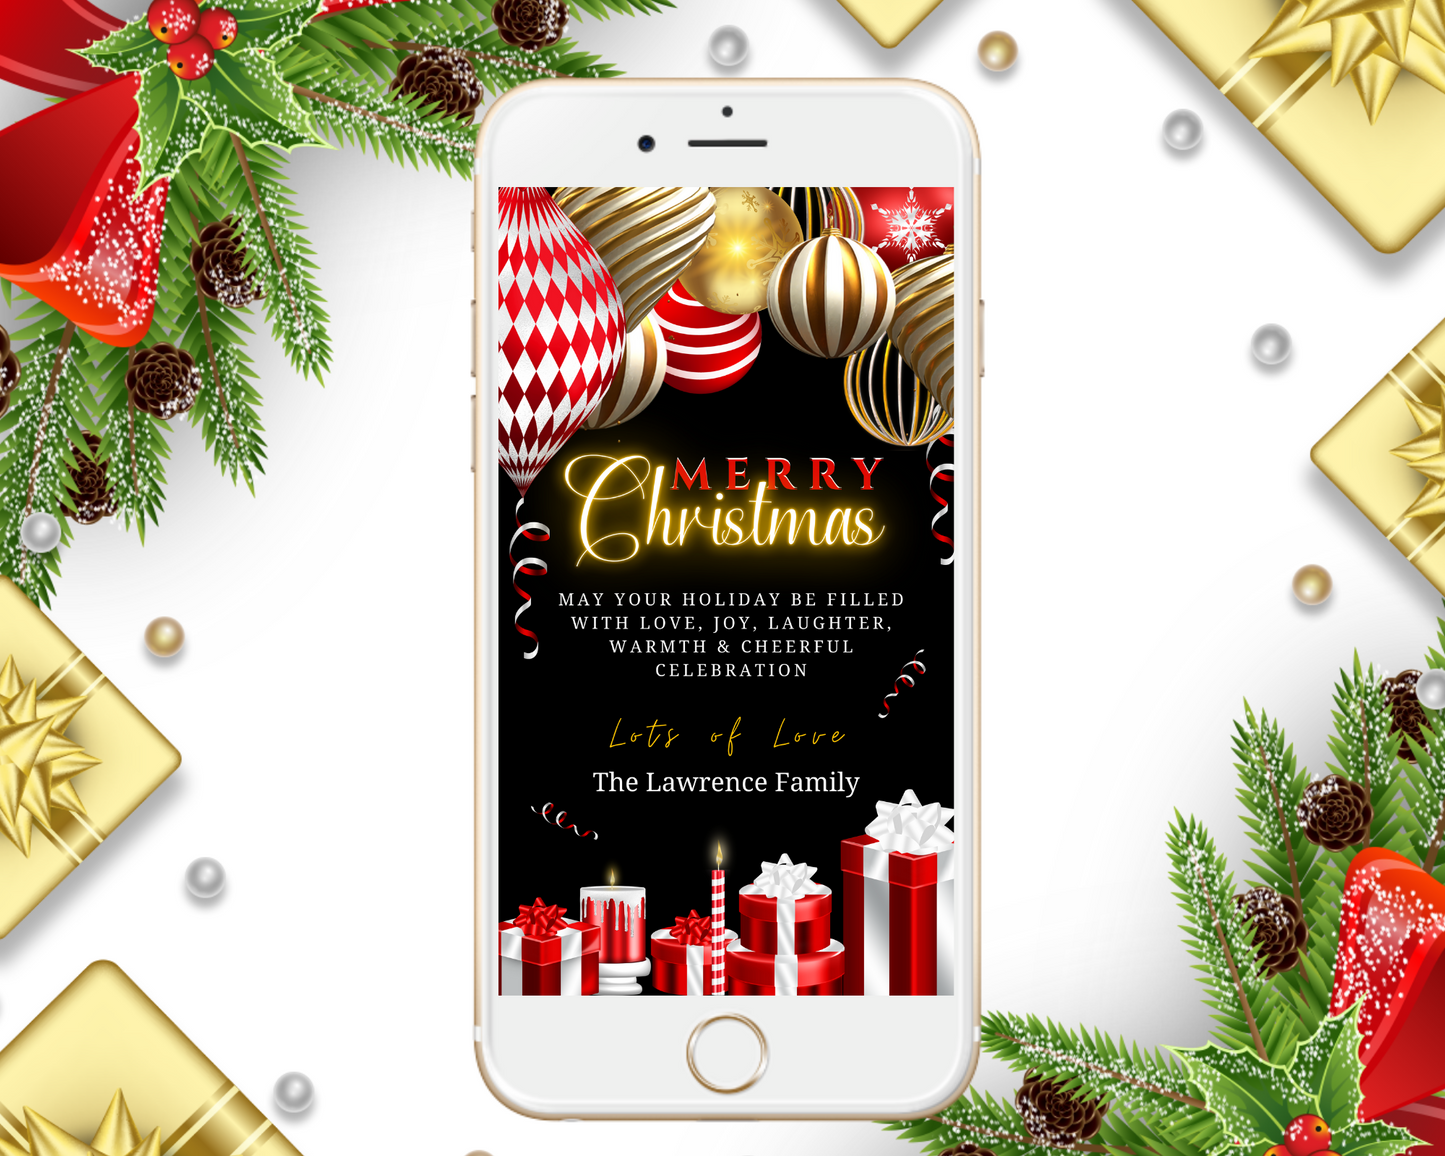 Gold Red Neon Presents Merry Christmas Greeting Ecard displayed on a smartphone with festive decorations including pinecones and gift boxes.